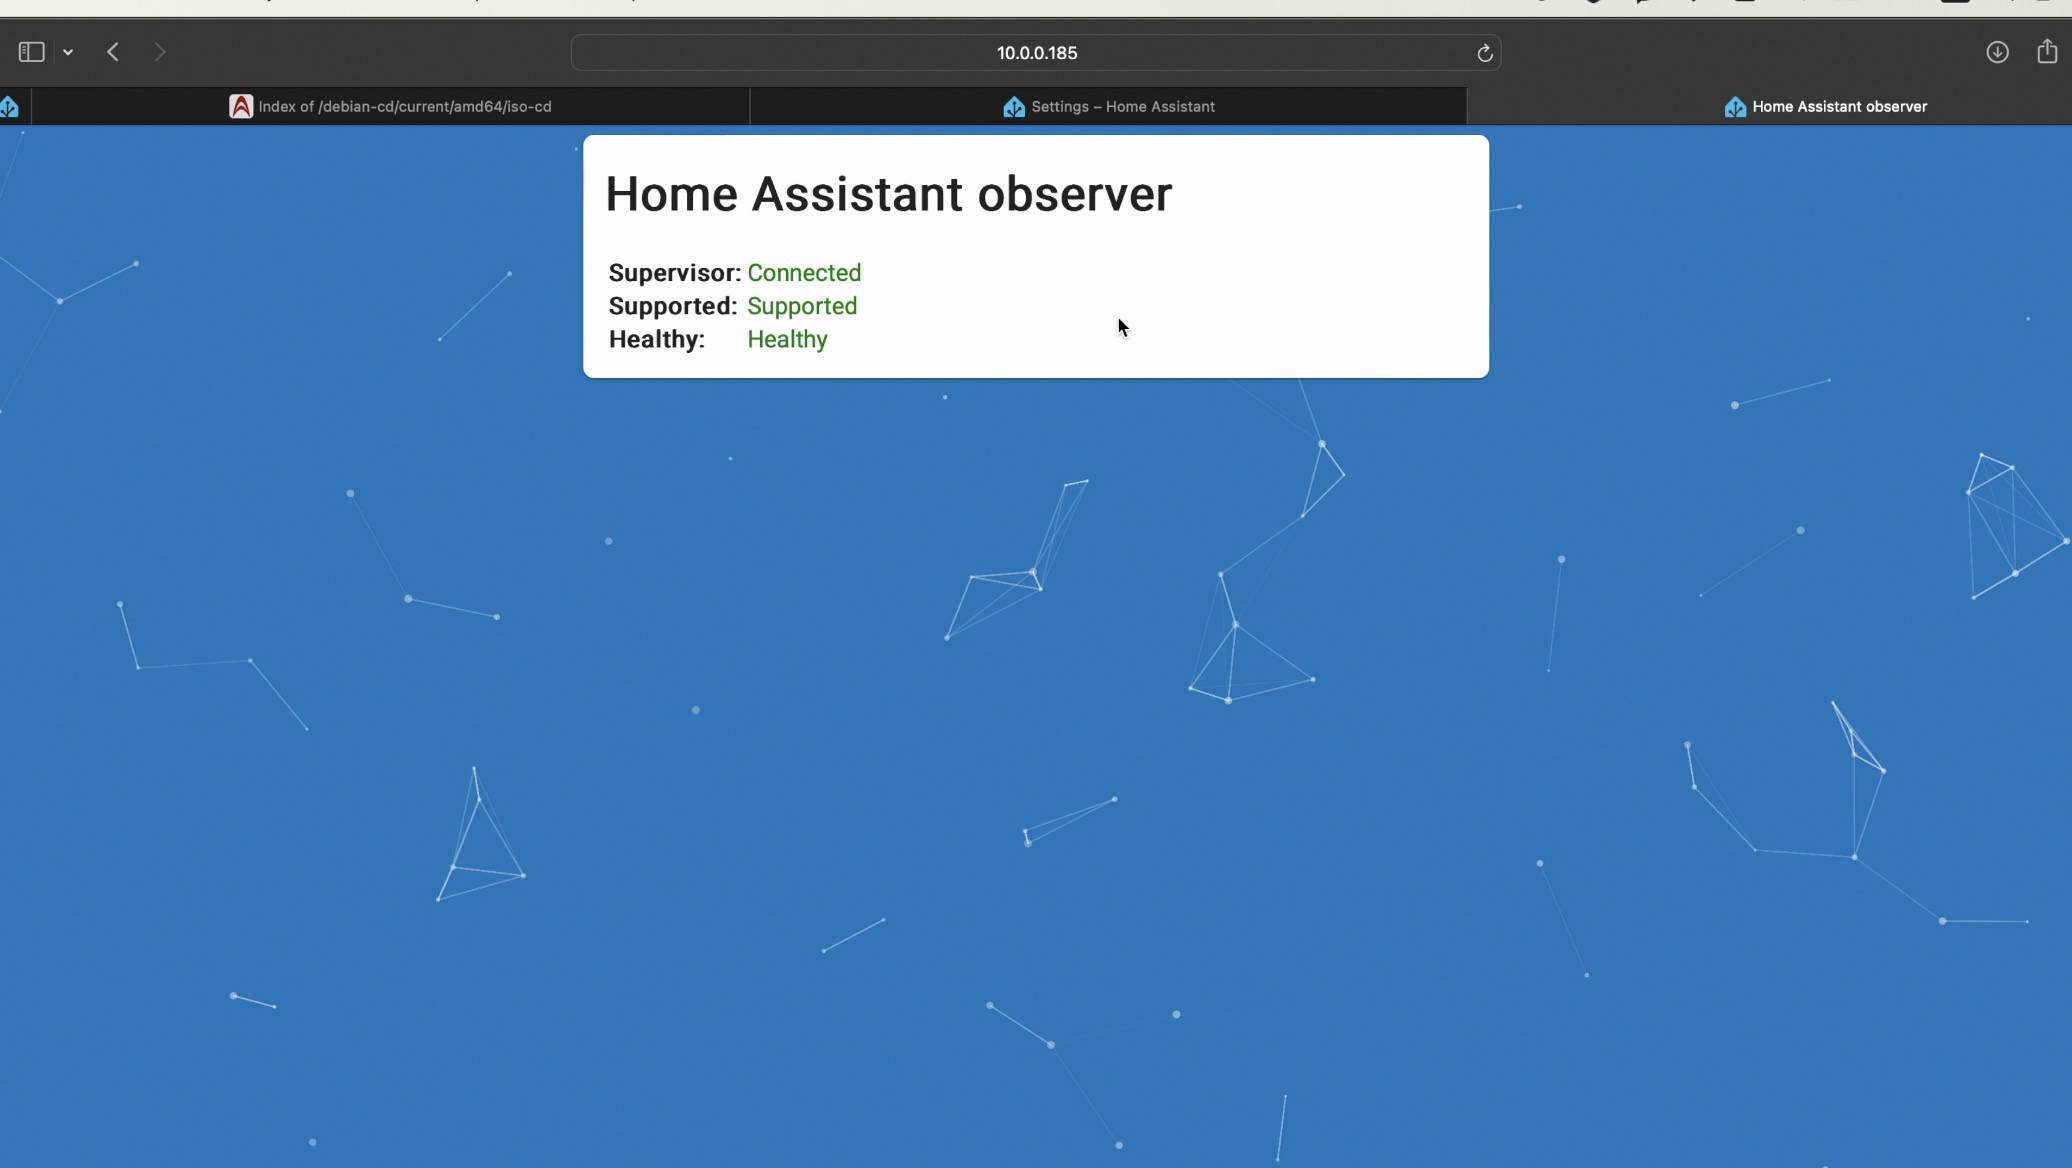 Home Assistant observer is at port 4357